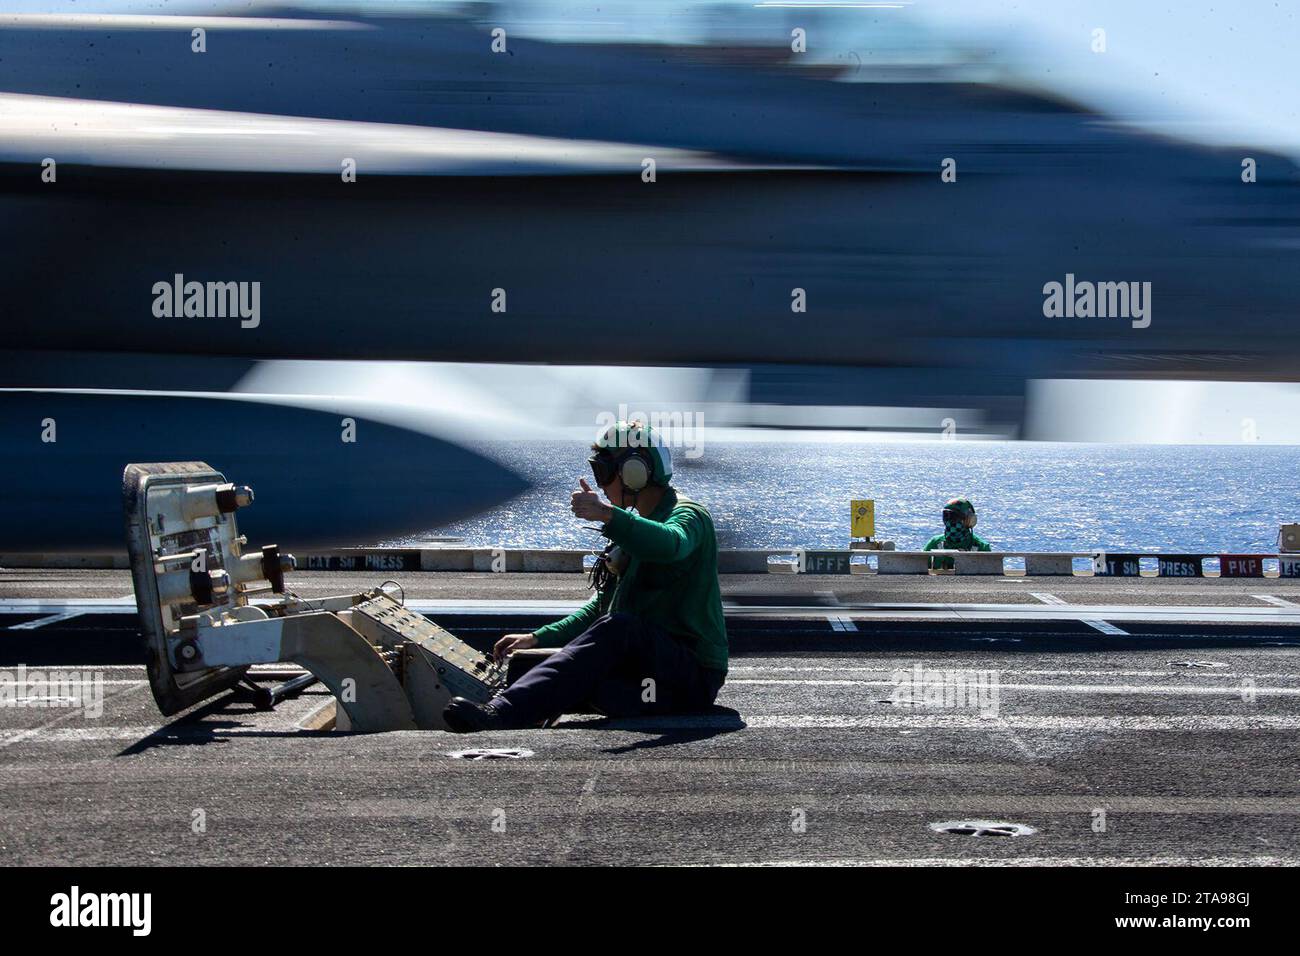 Oct 16, 2023 - Mediterranean Sea - Aviation Boatswain's Mate (Equipment) 3rd Class Jozuah Ramirez, from New Braunfels, Texas, assigned to the air department of the worlds largest aircraft carrier USS Gerald R. Ford (CVN 78), launches an F/A-18F Super Hornet, attached to the Blacklions of Strike Fighter Squadron (VFA) 213 on the flight deck, Oct. 16, 2023. Gerald R. Ford is the U.S. Navy's newest and most advanced aircraft carrier, representing a generational leap in the U.S. Navy's capacity to project power on a global scale. The Gerald R. Ford Carrier Strike Group is currently operating in th Stock Photo